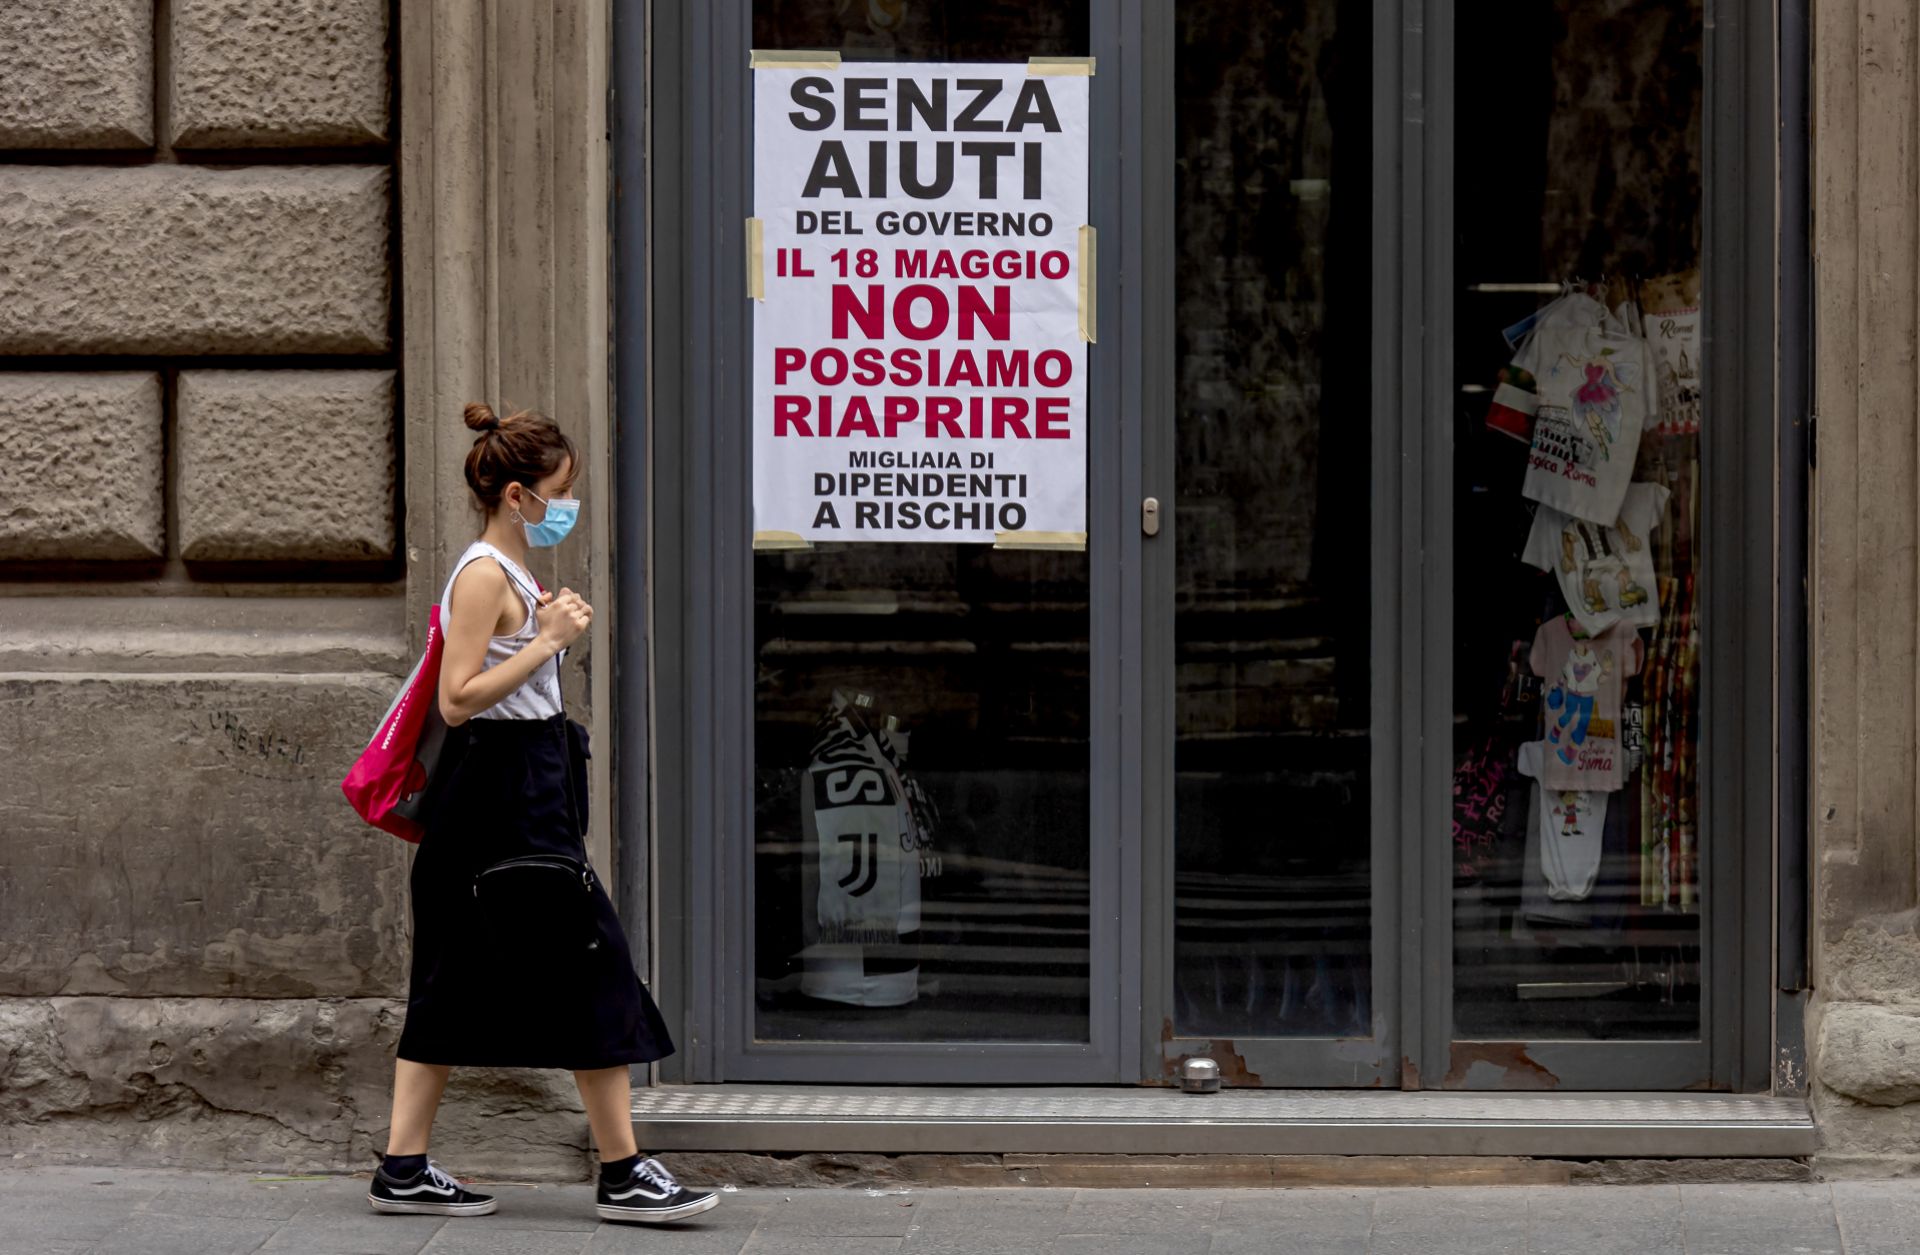 A woman wearing a face mask walks past a closed shop in Rome, Italy, on May 18, 2020. The sign on the store window reads "Without government aid, we cannot reopen on May 18. Thousands of employees at risk." 